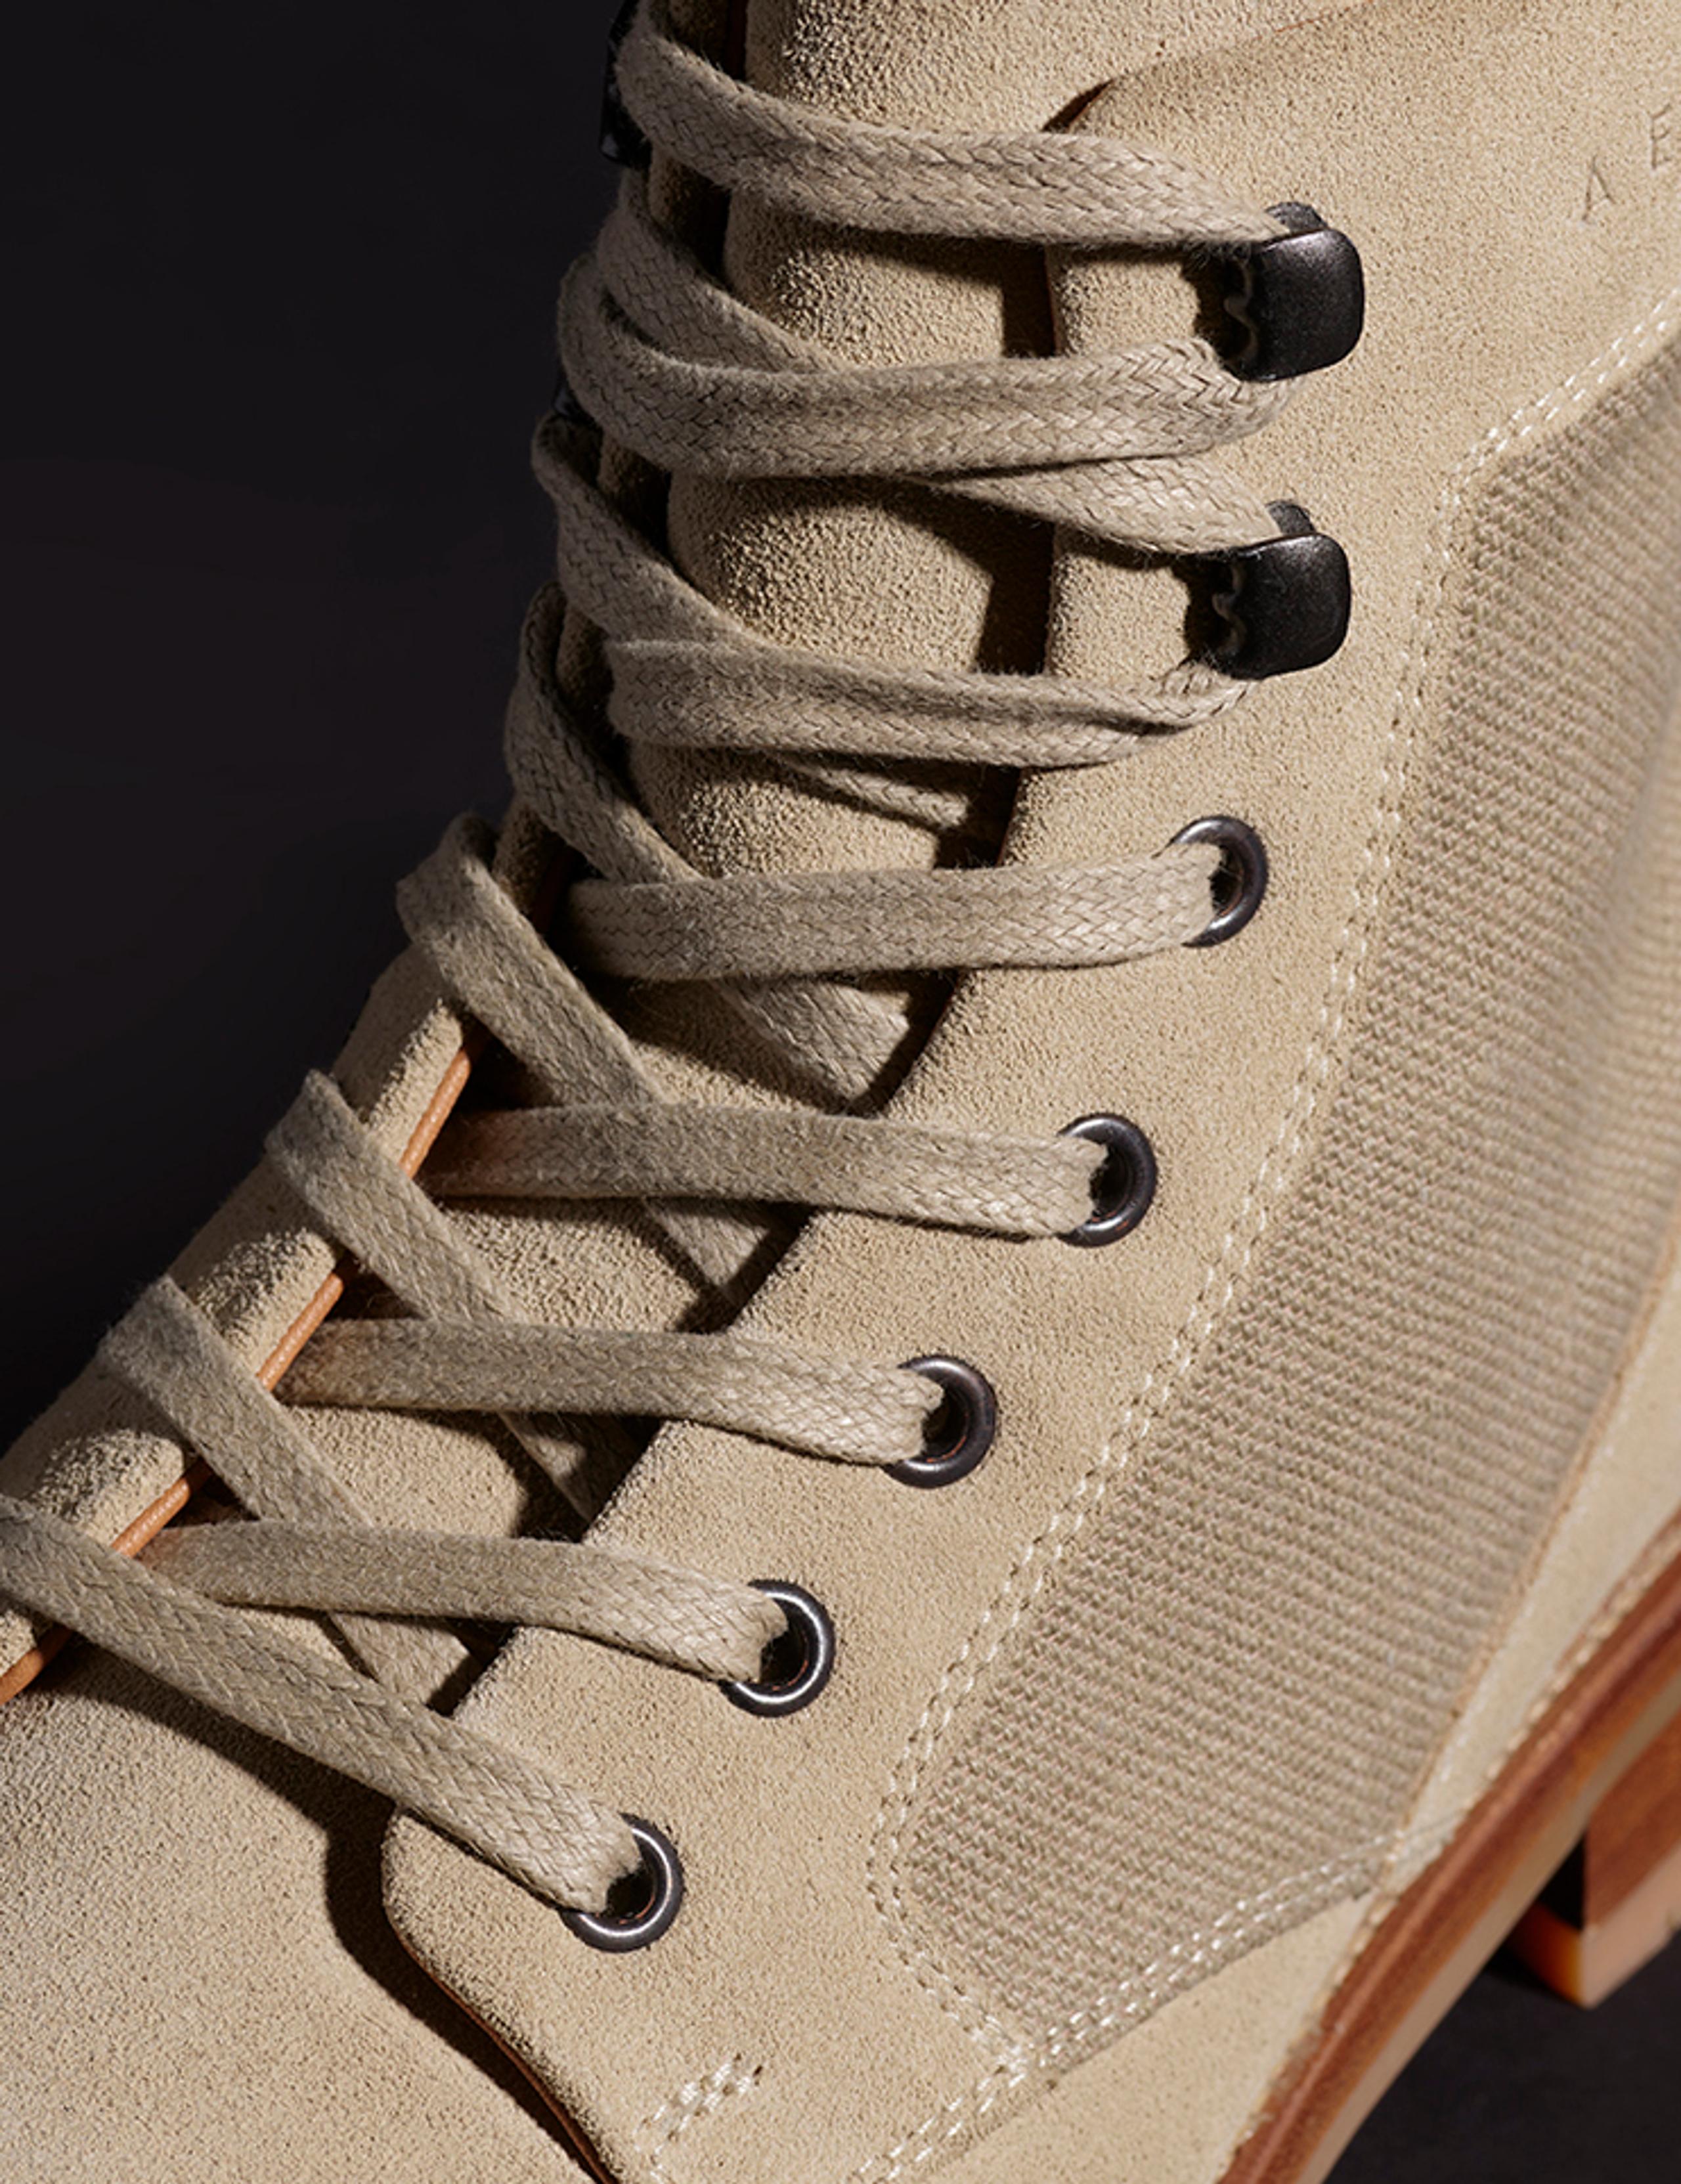 Closeup view of laces and metal eyelets